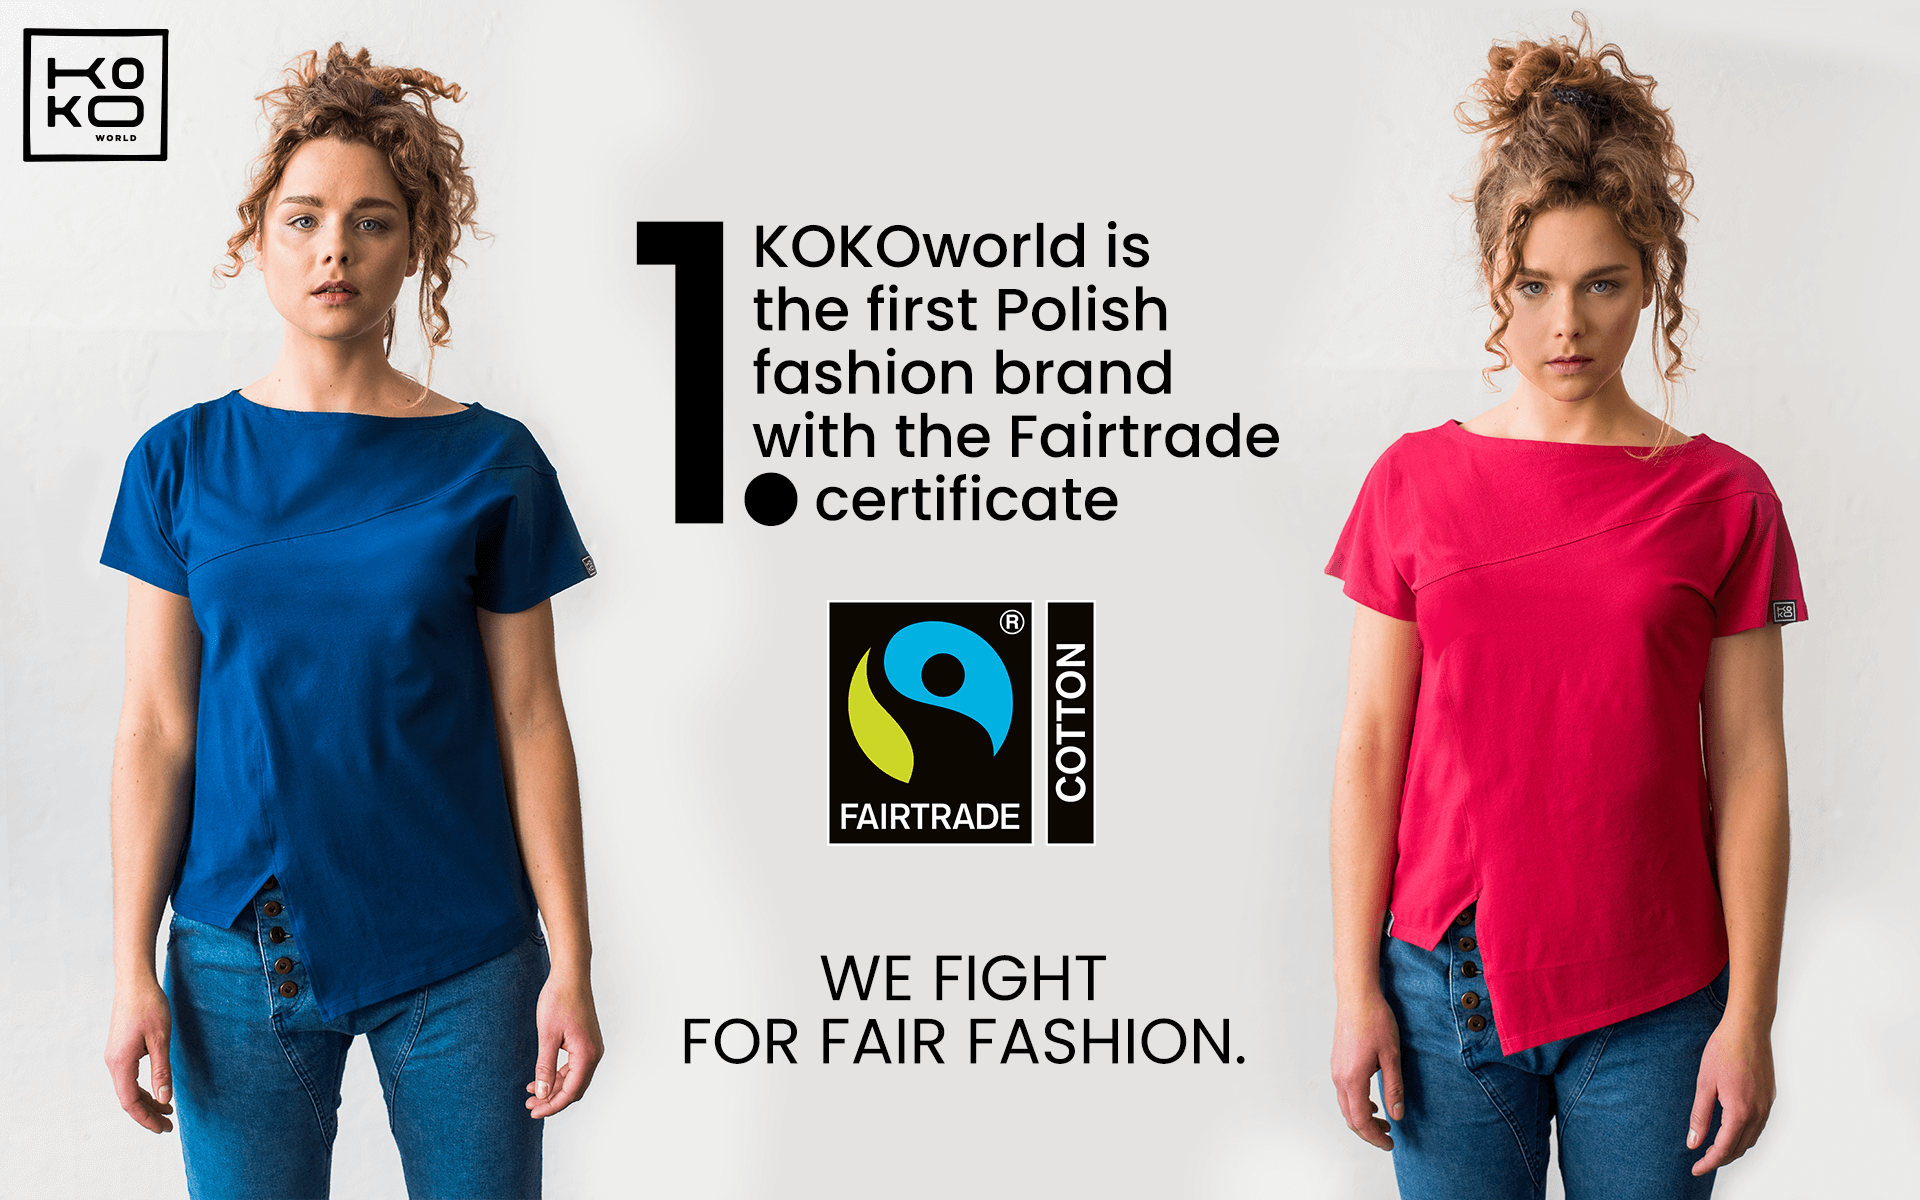 We fight for fair fashion - KOKOworld as the first Polish fashion brand with the Fairtrade certificate